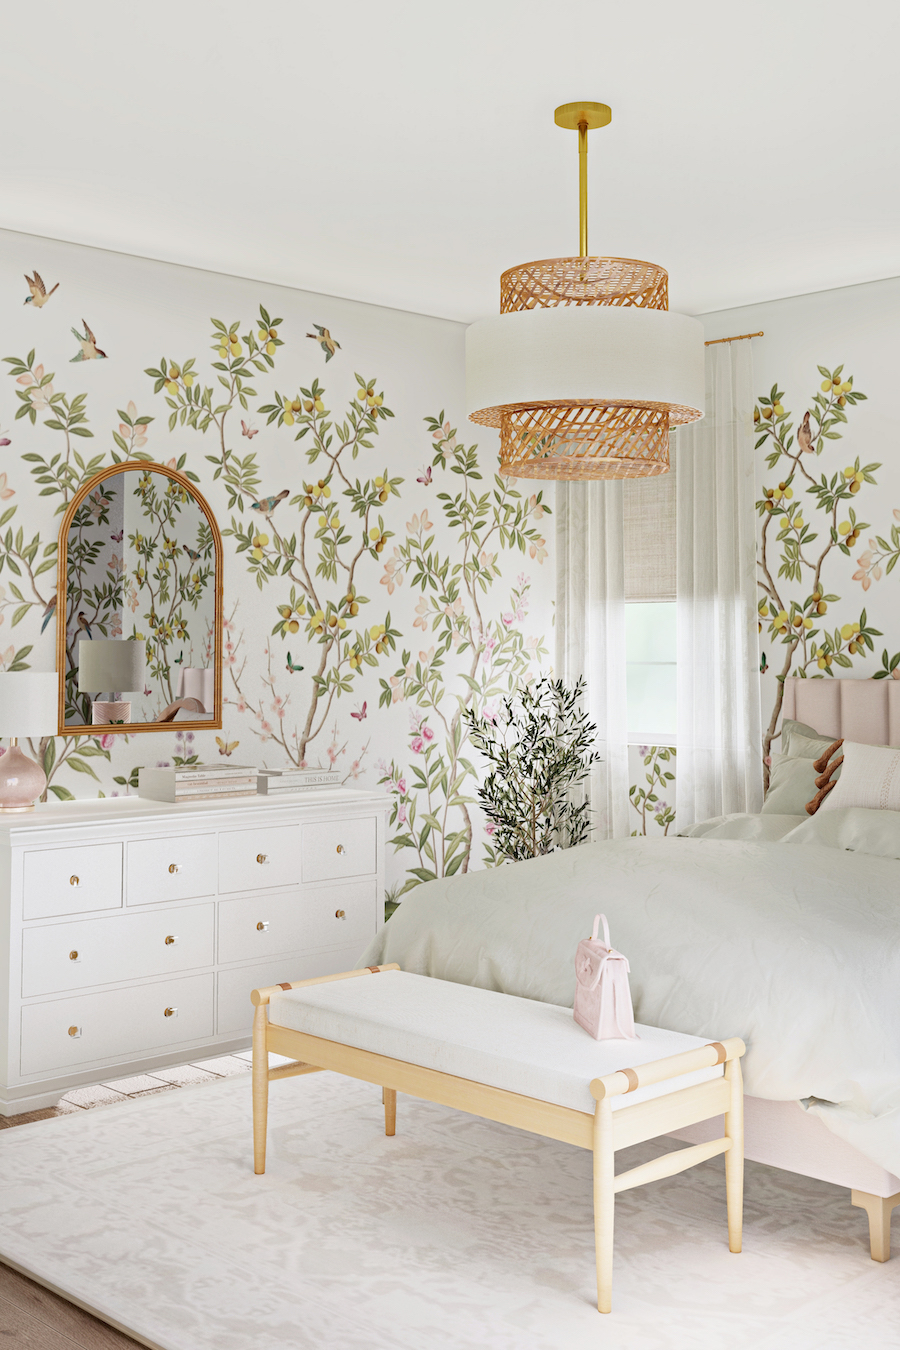 Girl's Room with Chinoiserie Wallpaper